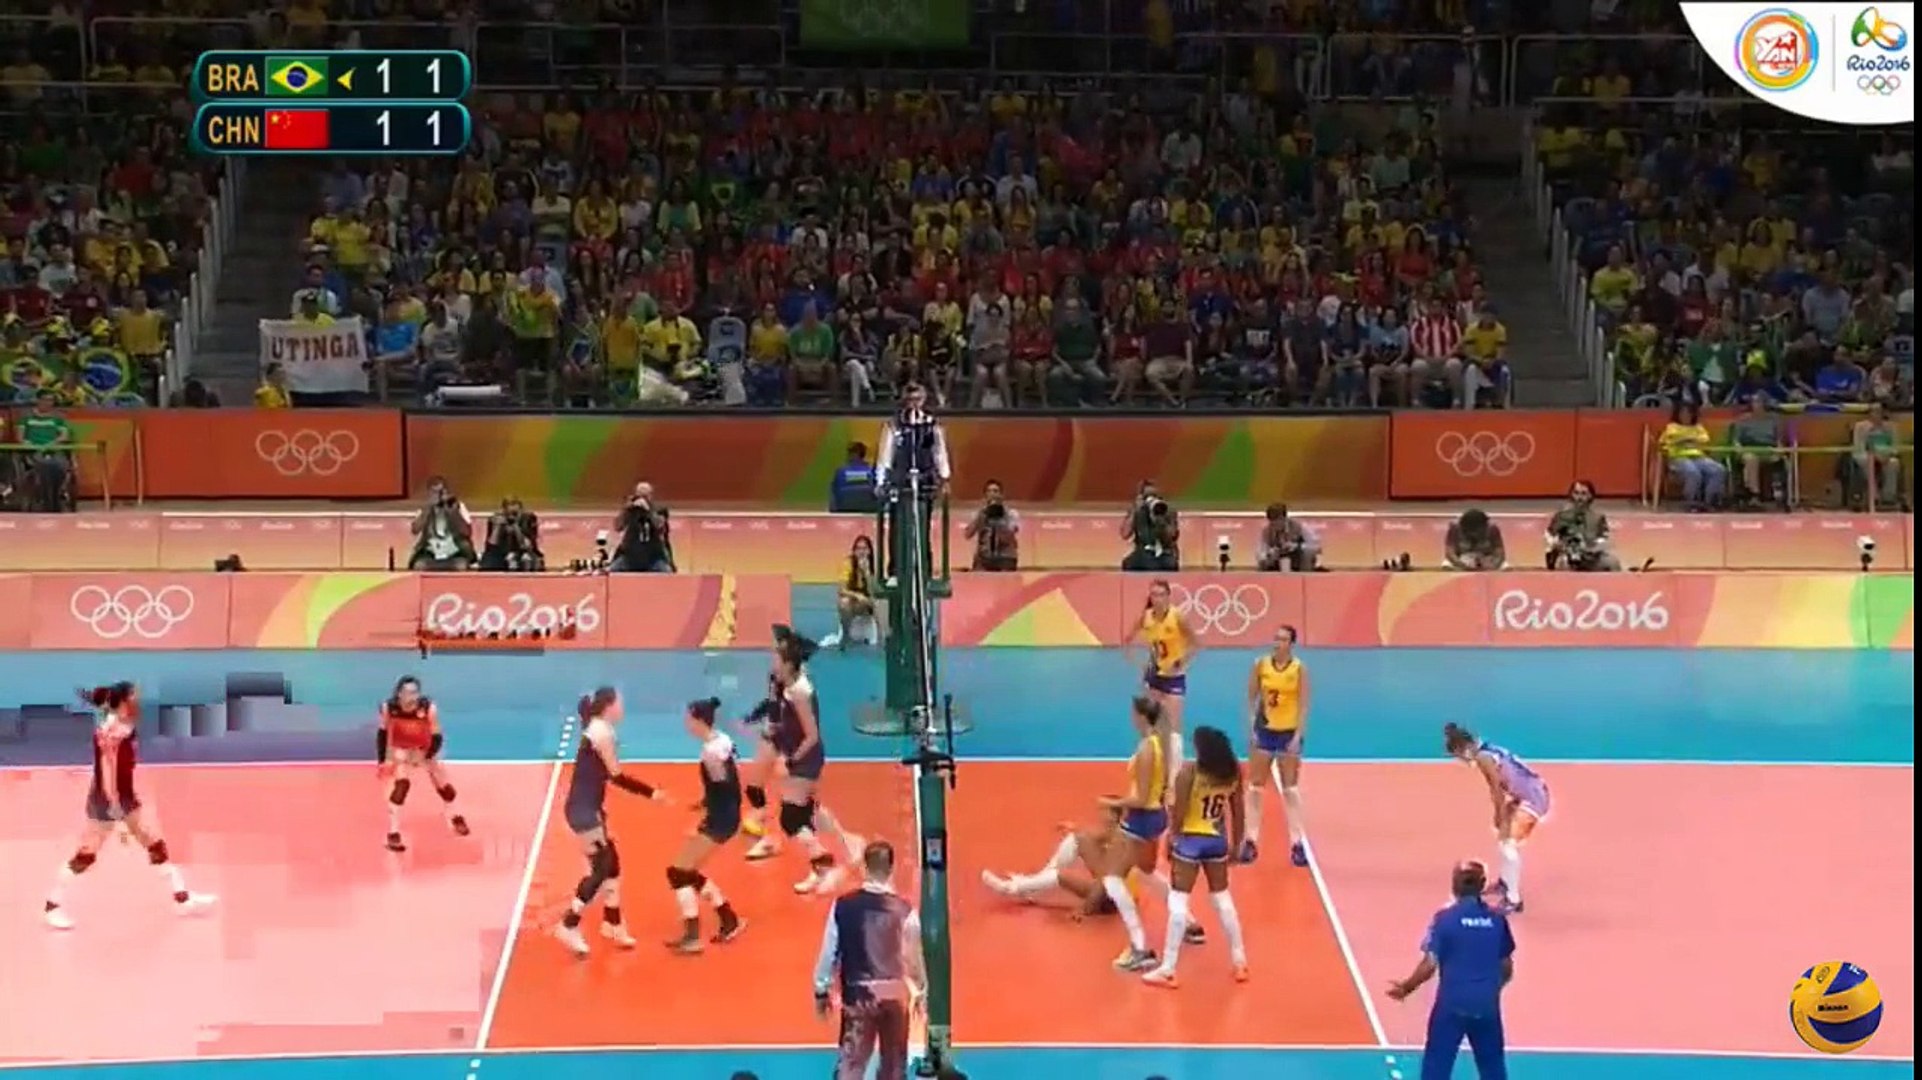 Brazil Vs China 16 Aug 2016 Quarterfinals Womens Volleyball Olympic Games Rio 2016 This Is Volleyball Set 3 à¸§ à¸